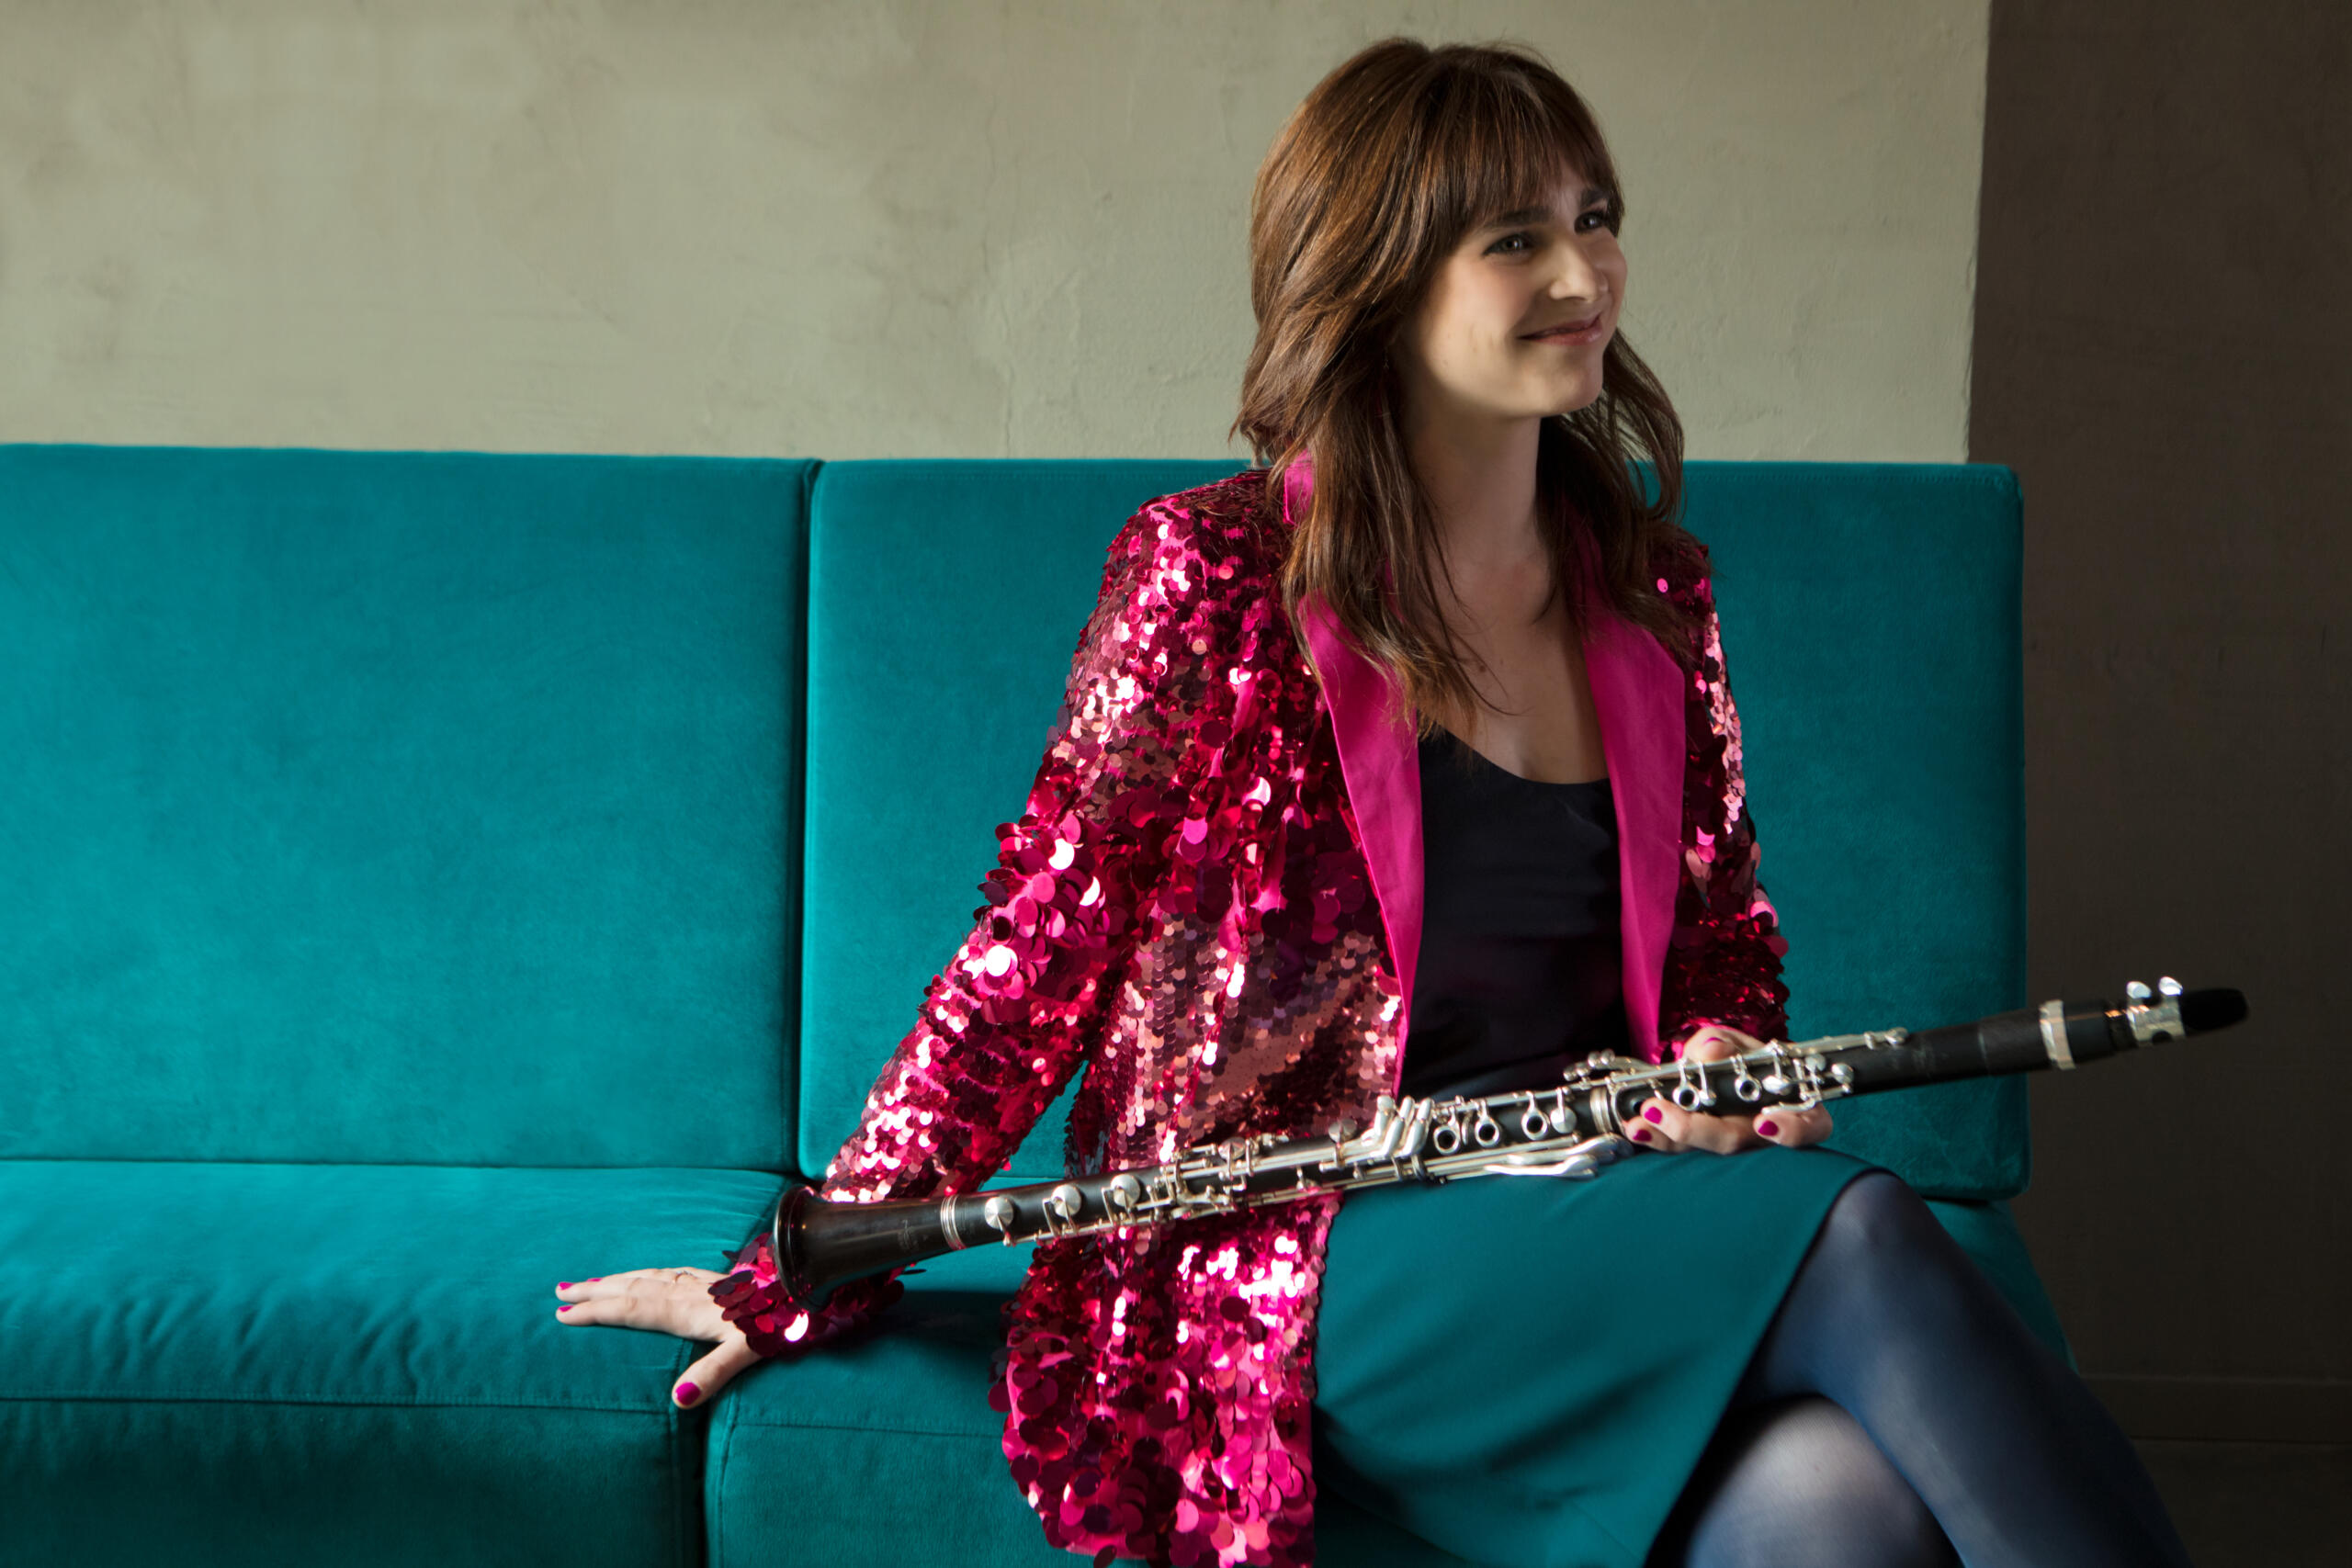 A young woman sits on a sofa with her clarinet in her hand.